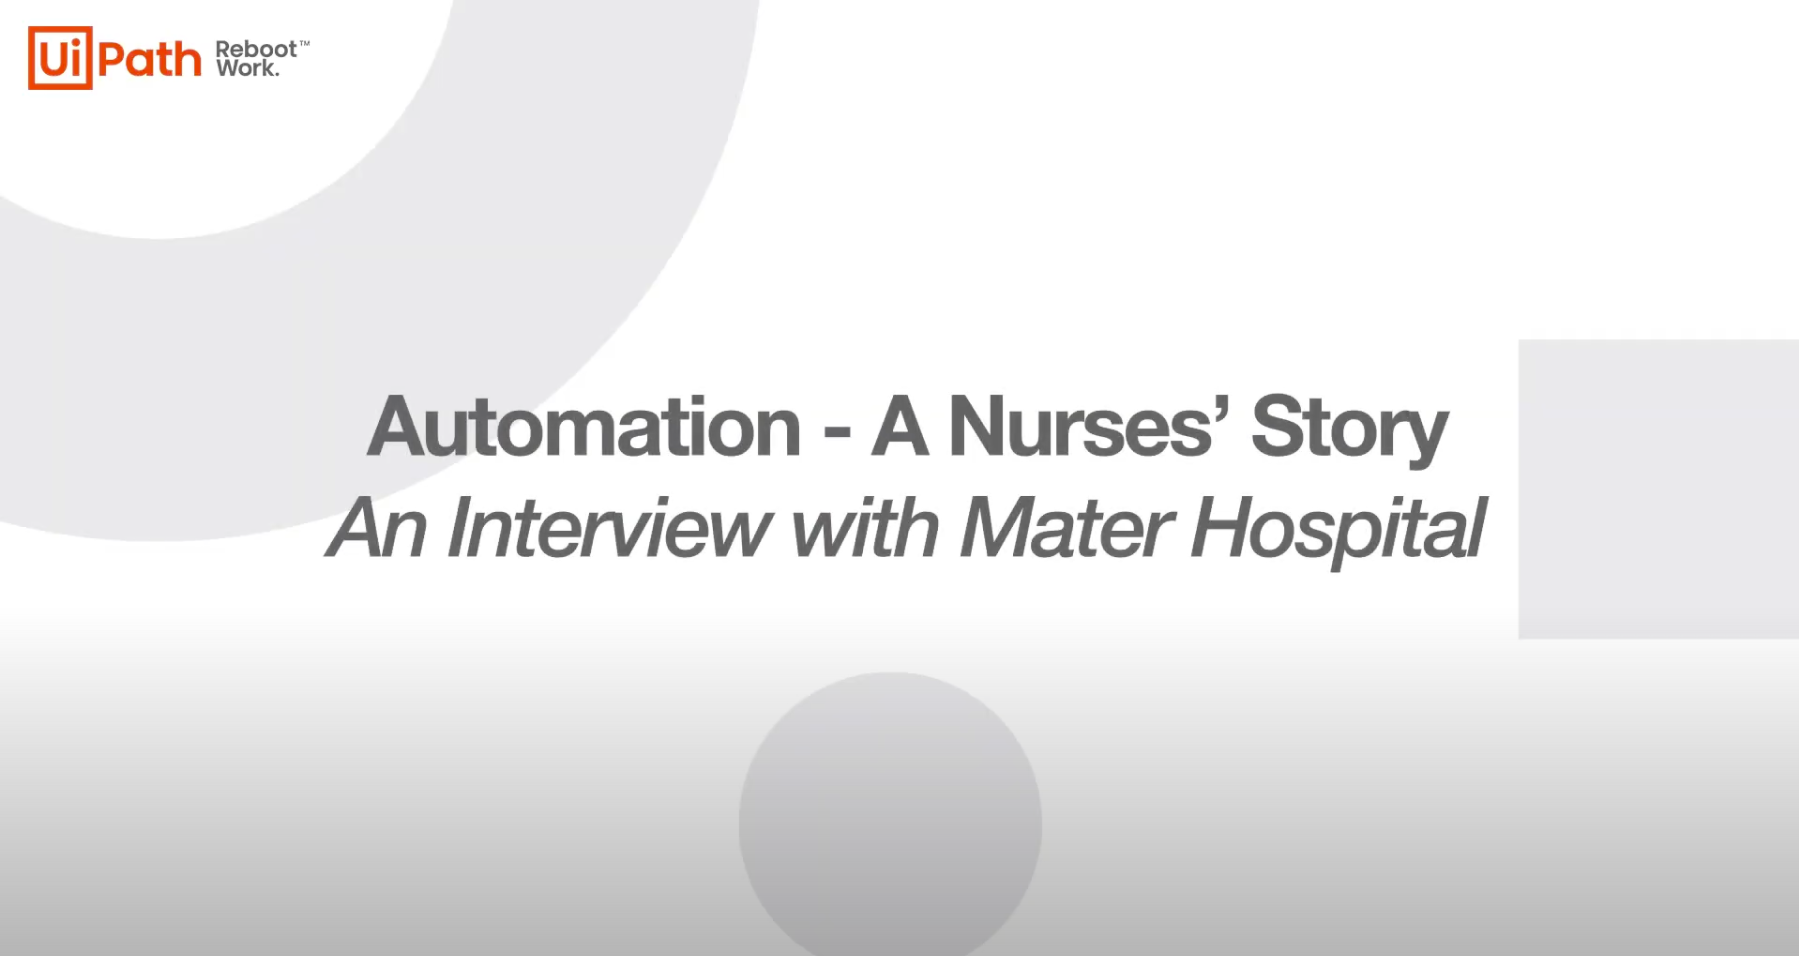 How Mater Hospital Experienced Benefits of Automation During COVID